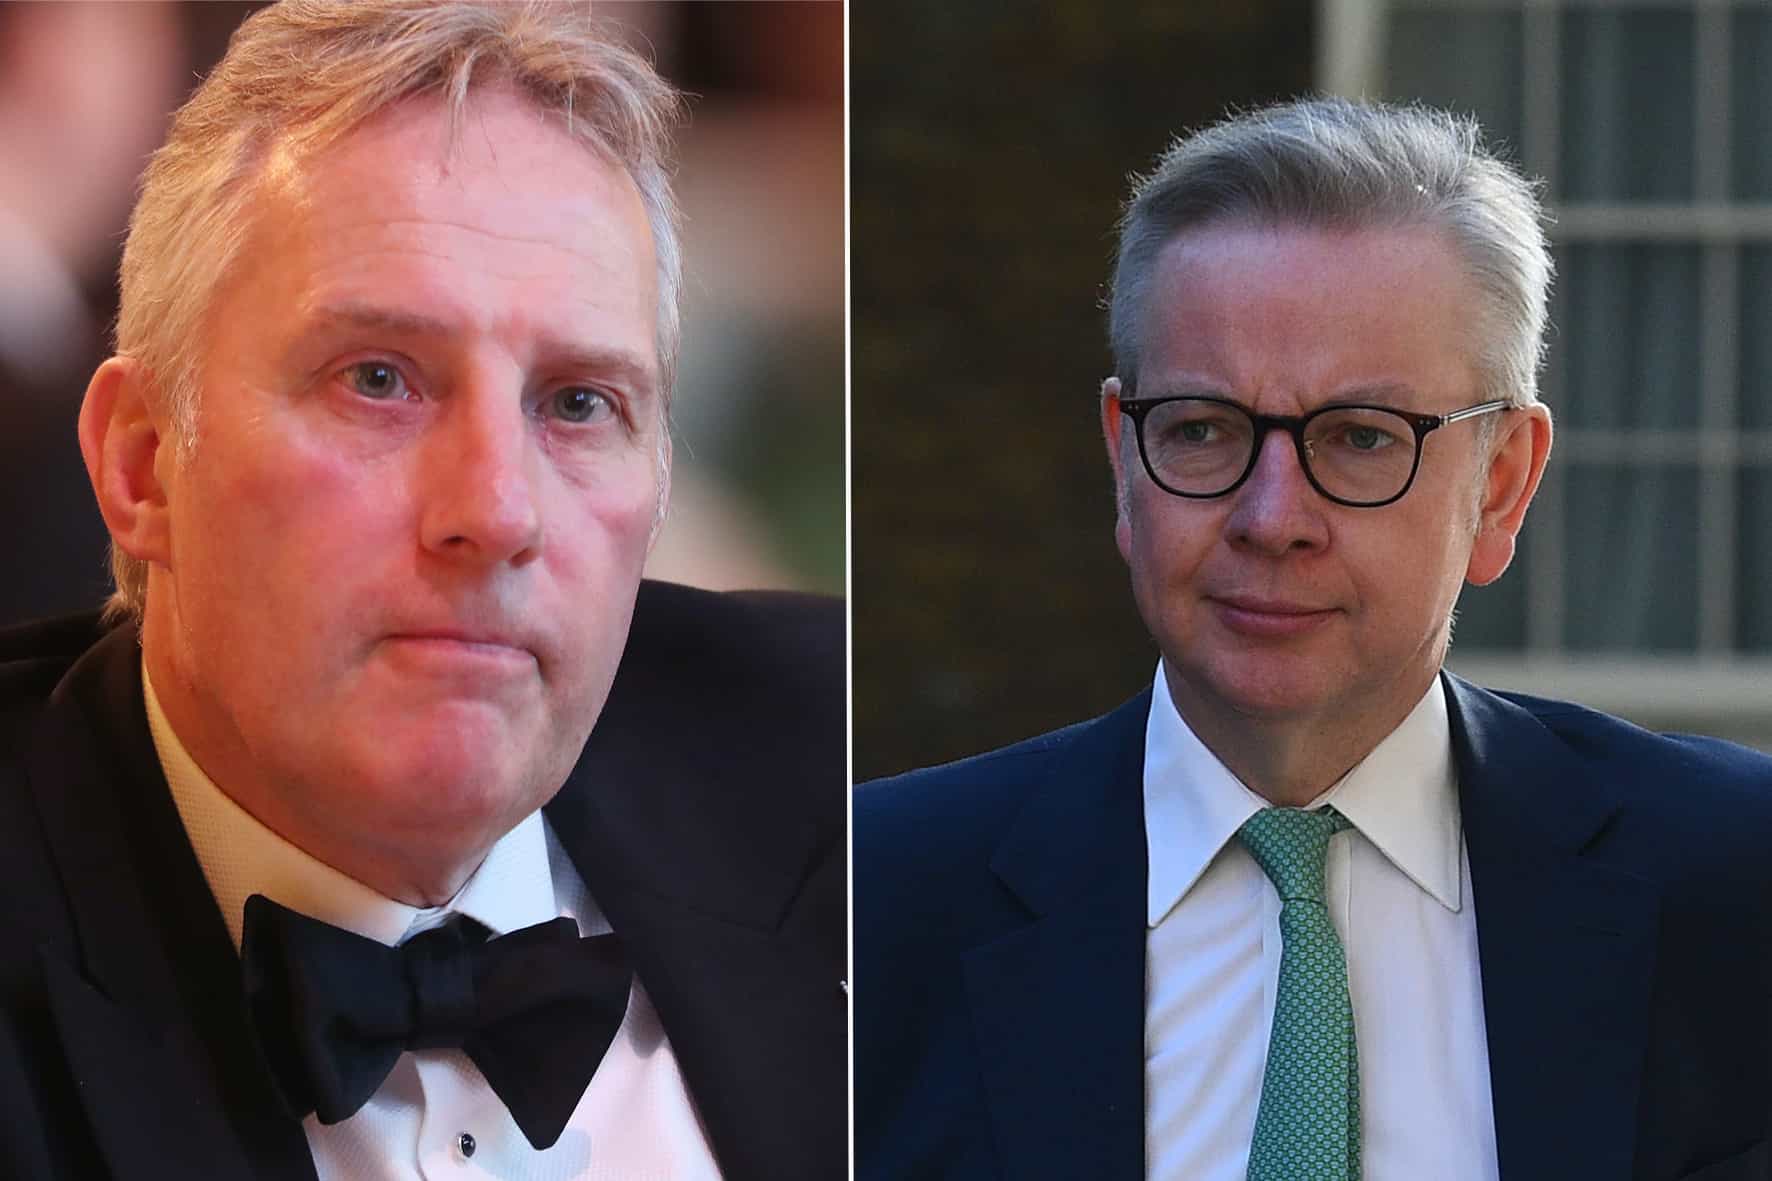 DUP MP fined by Electoral Commission for Michael Gove dinner